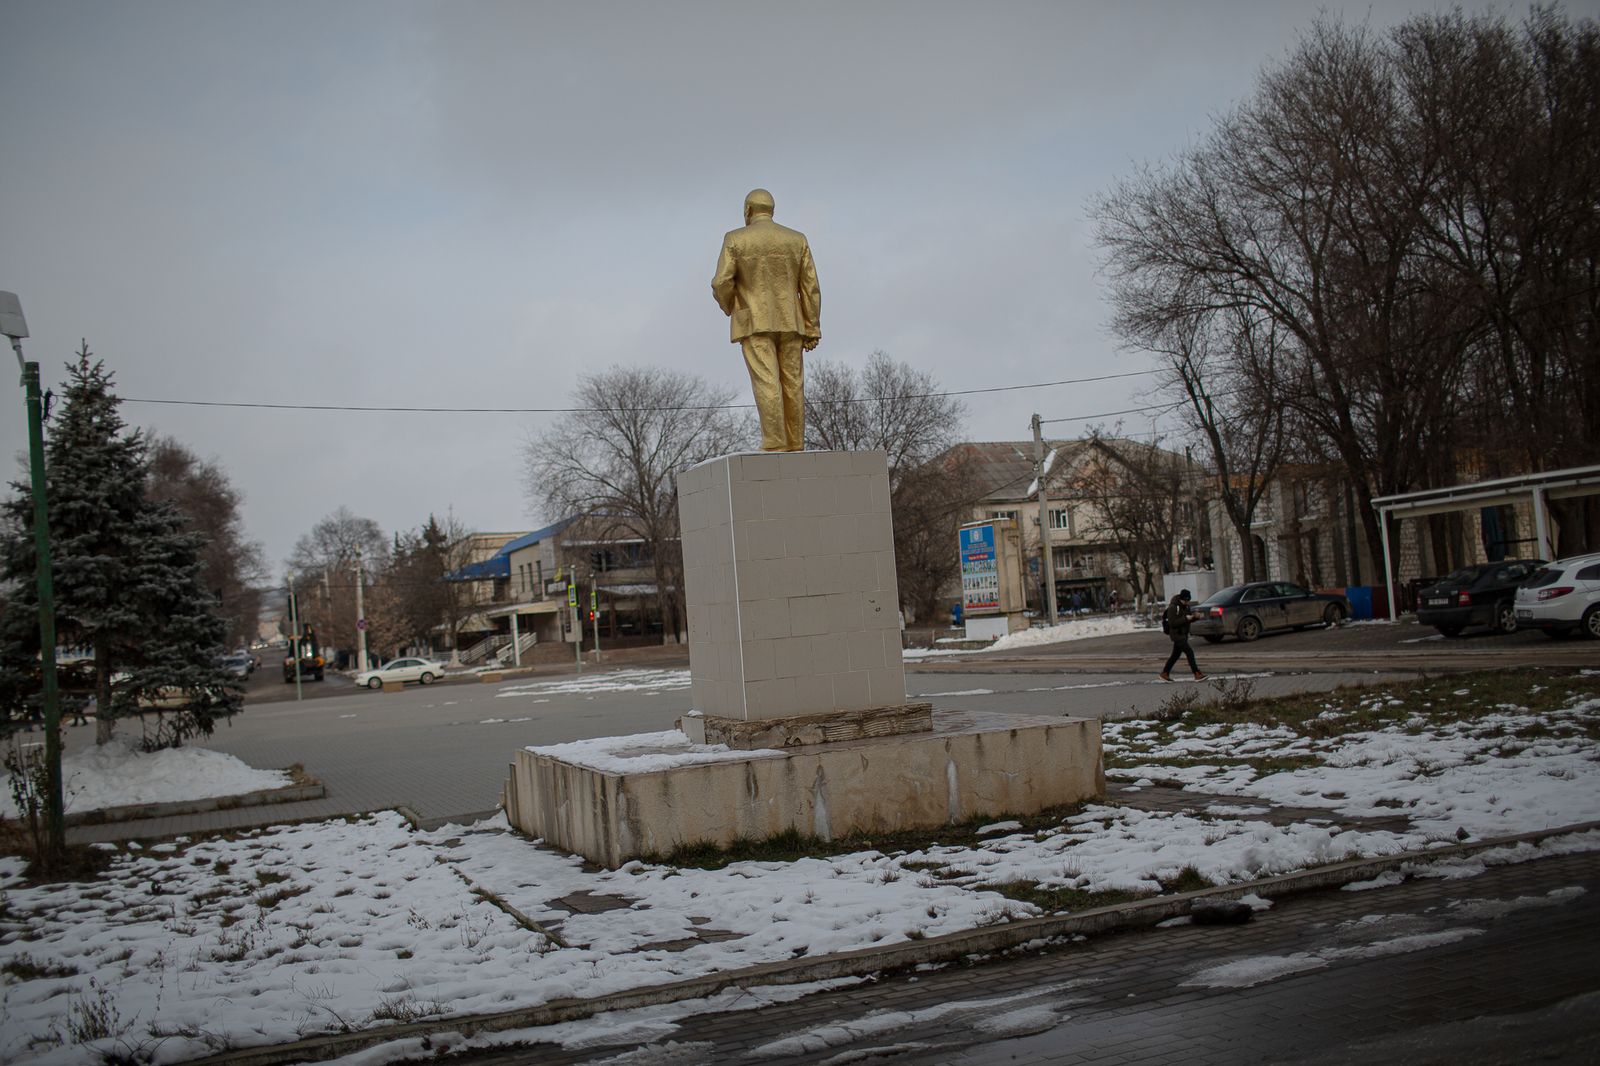 © Maurizio Gjivovich - Image from the Moldova - stories of life along the Dnestr river / February 2023 photography project